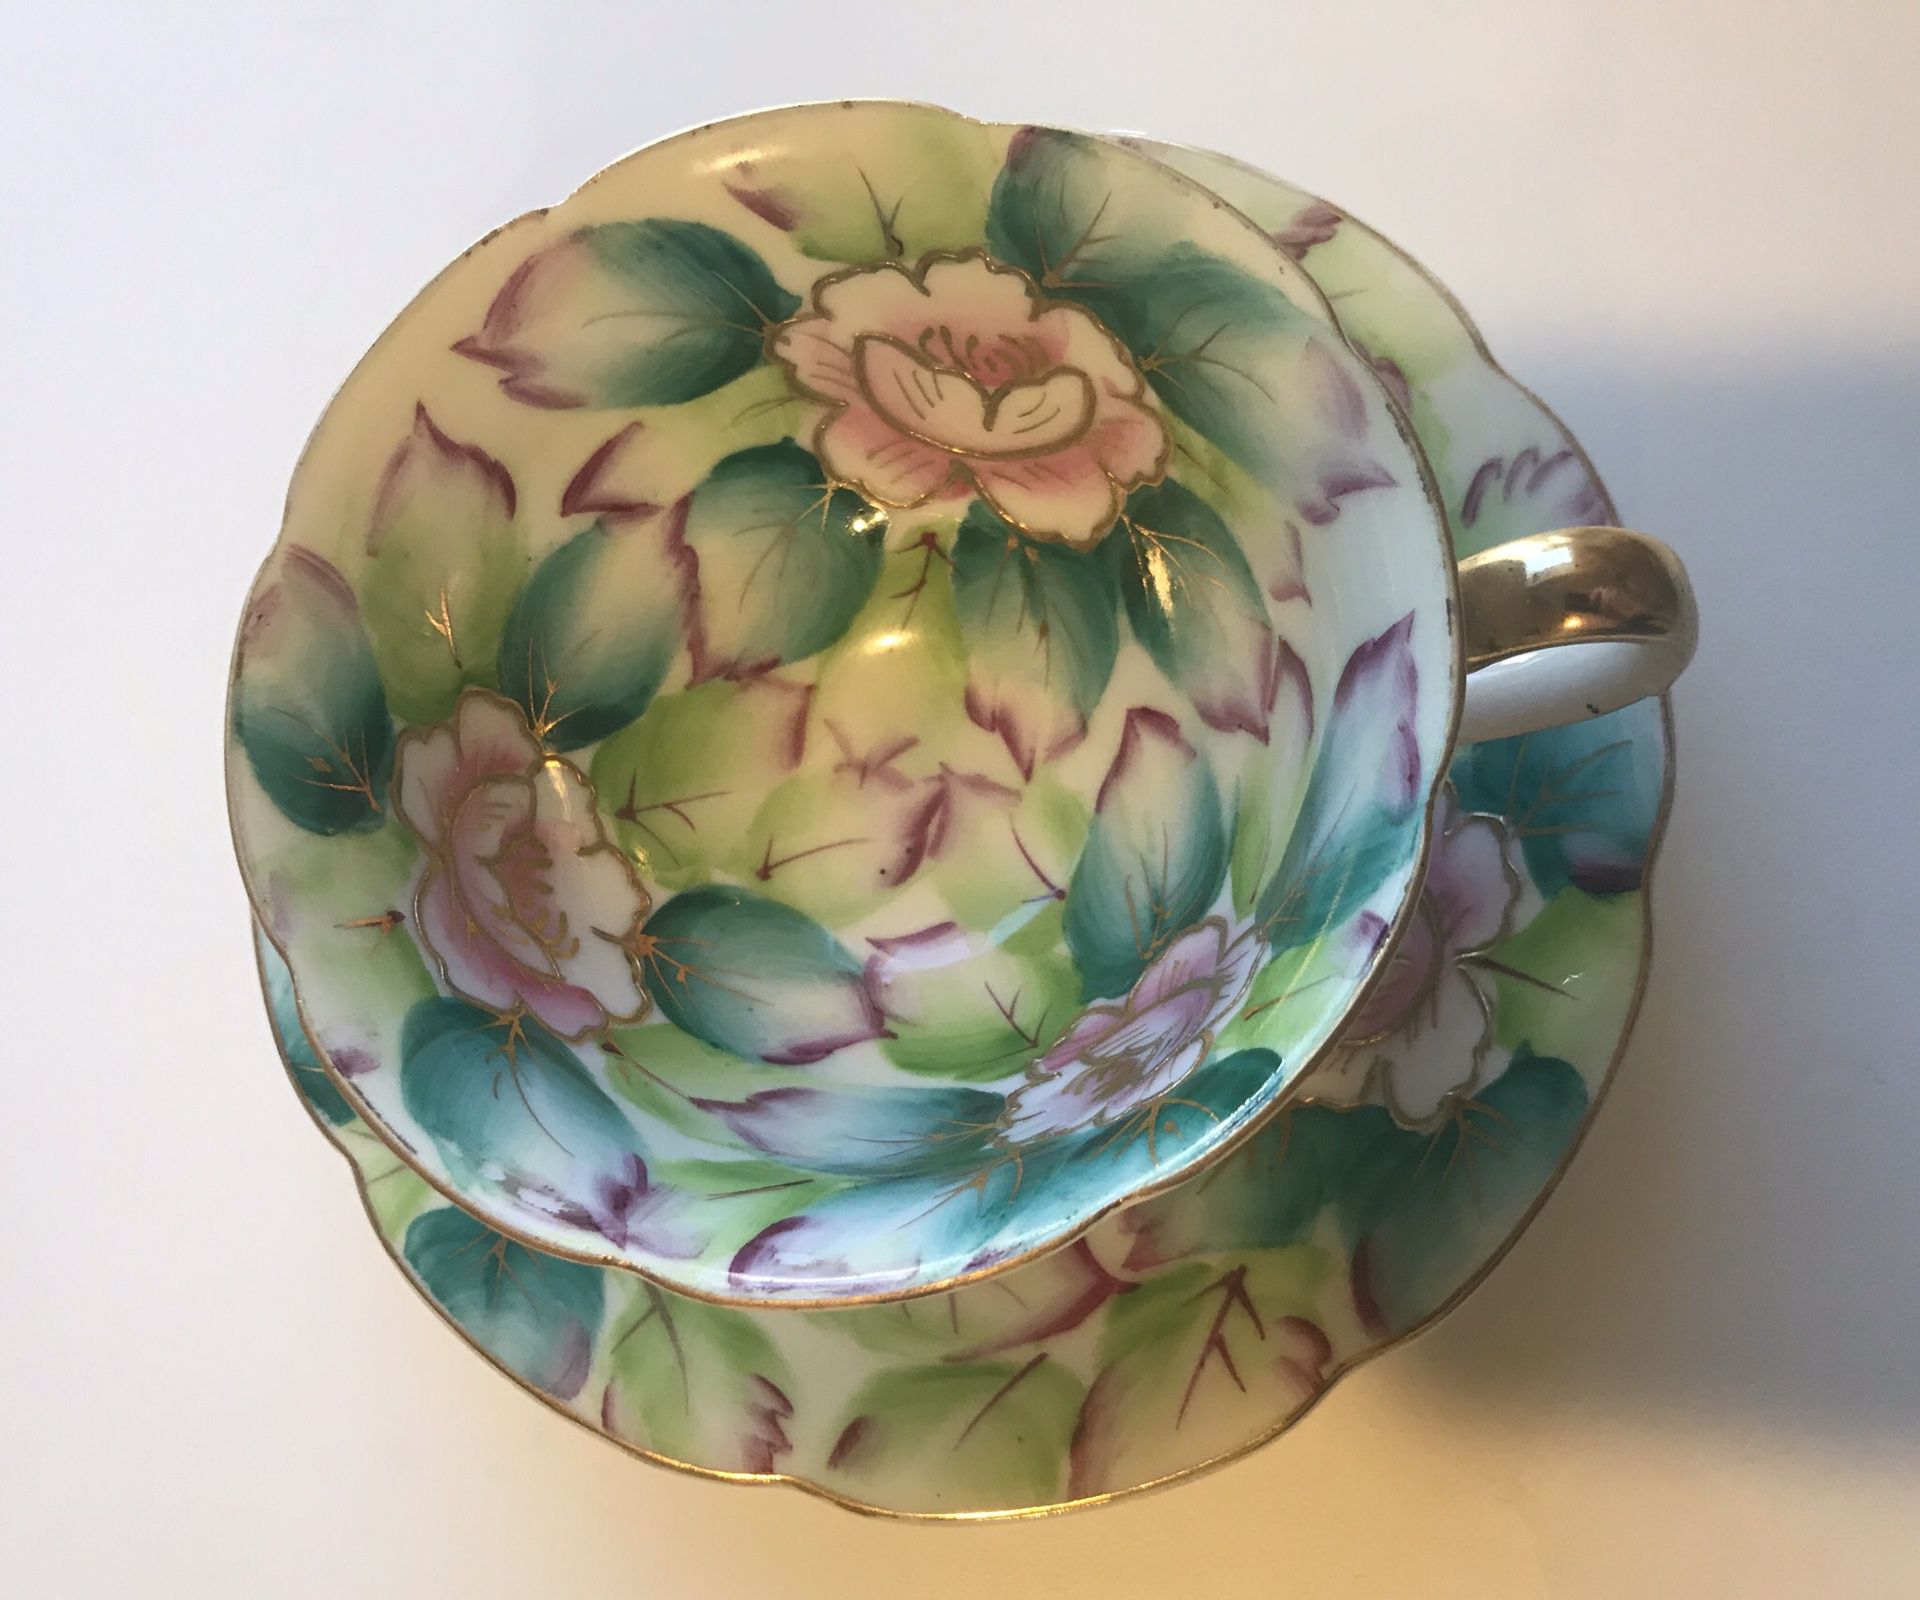 Vintage Tea Cup and Saucer